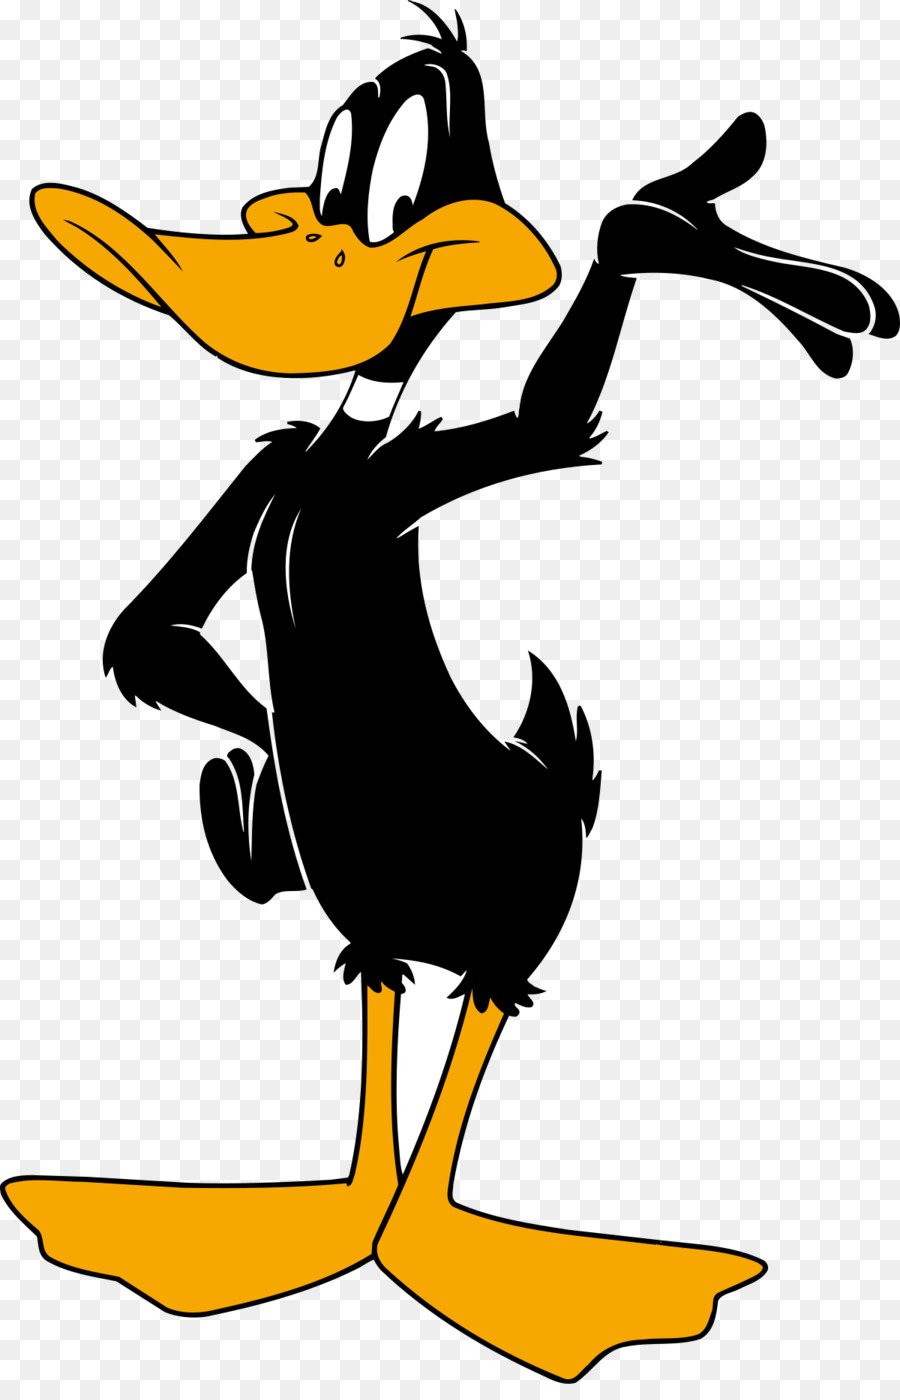 Daffy Duck Bugs Bunny Porky Pig Cartoon - donald duck png download - 1200*1848 - Free Transparent Daffy Duck png Download.